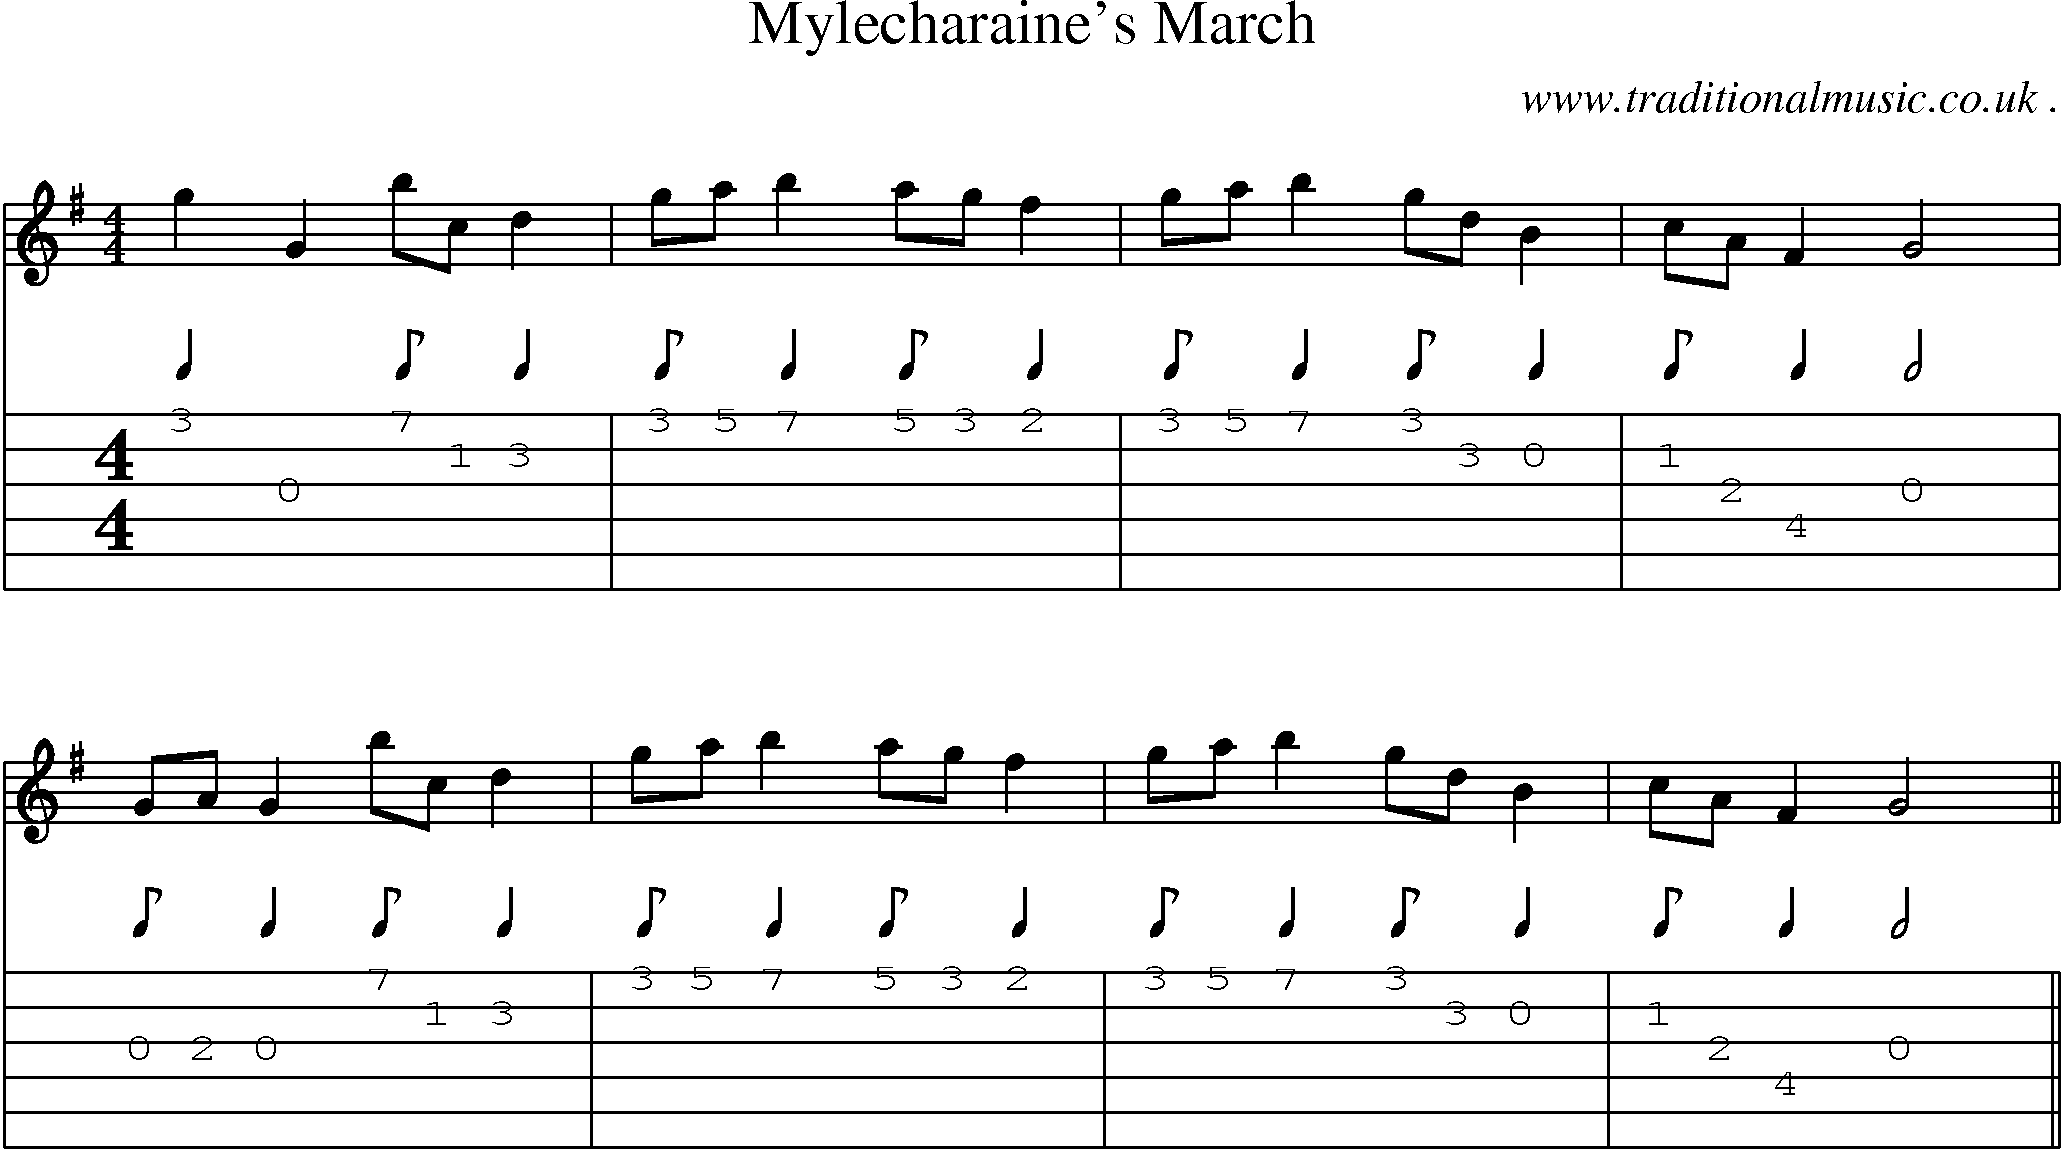 Sheet-Music and Guitar Tabs for Mylecharaines March